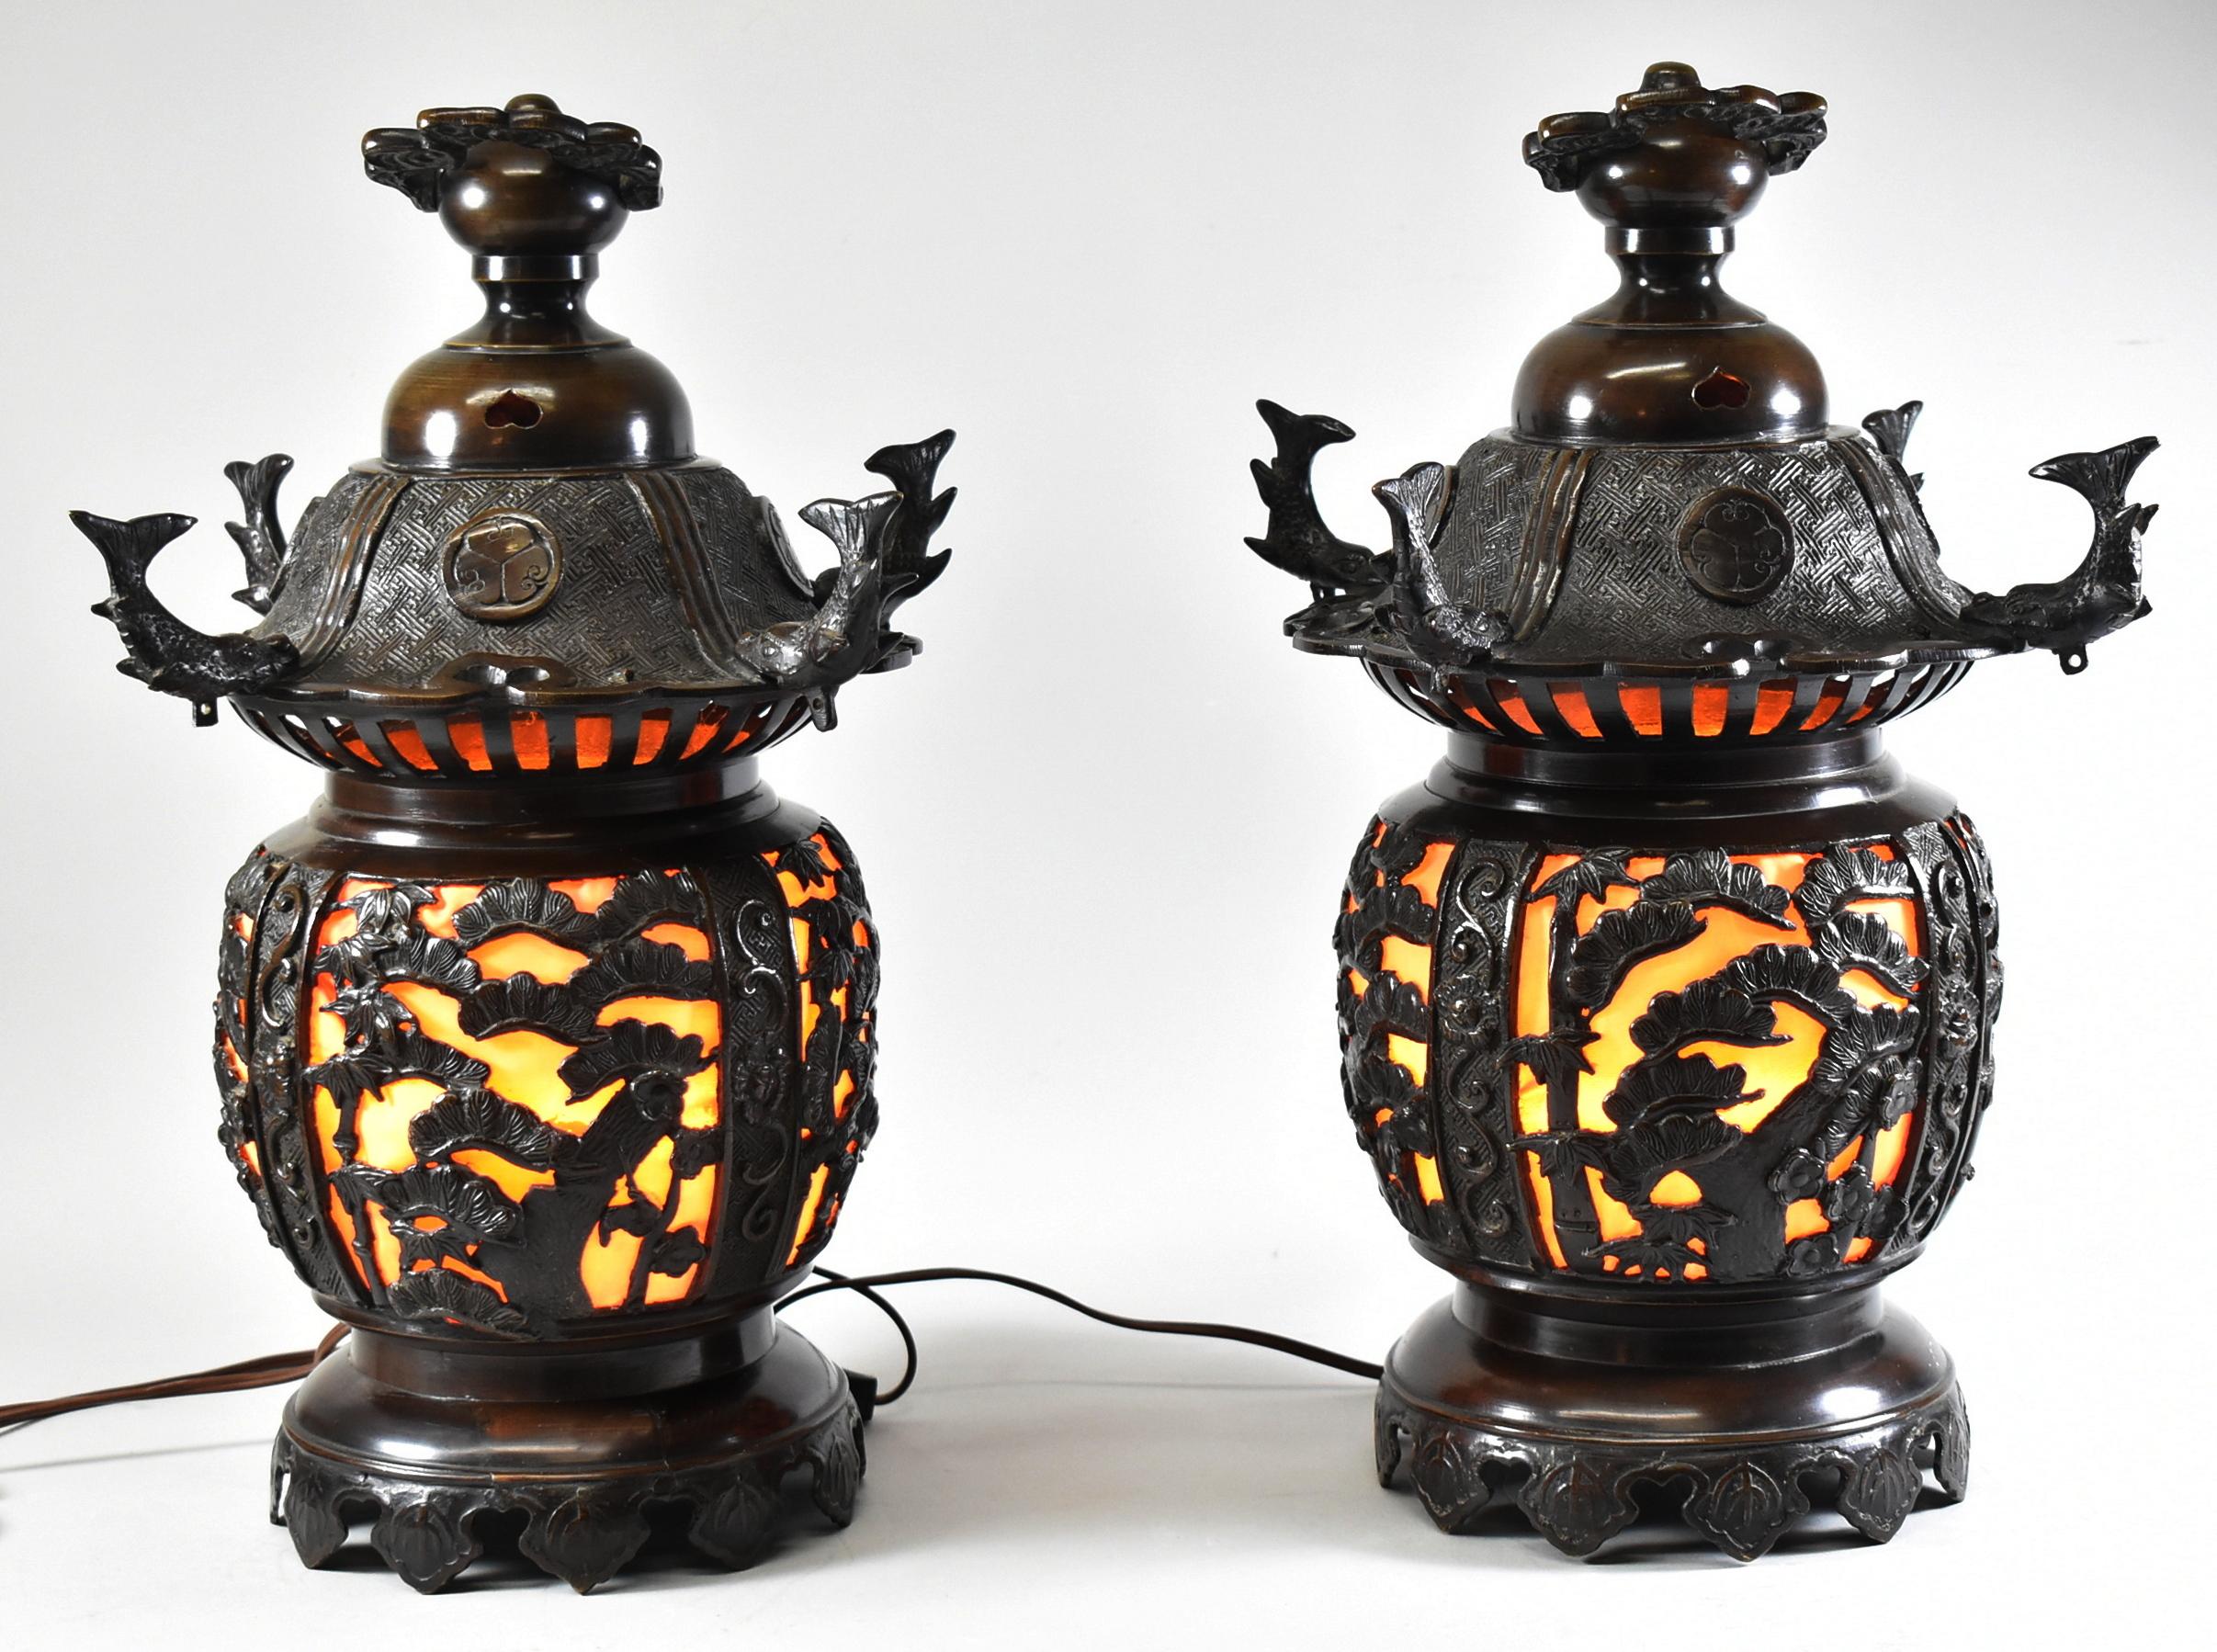 Pair of bronze Asian style reticulated lanterns with a single socket. Figural fish on the cap. Measure: 18